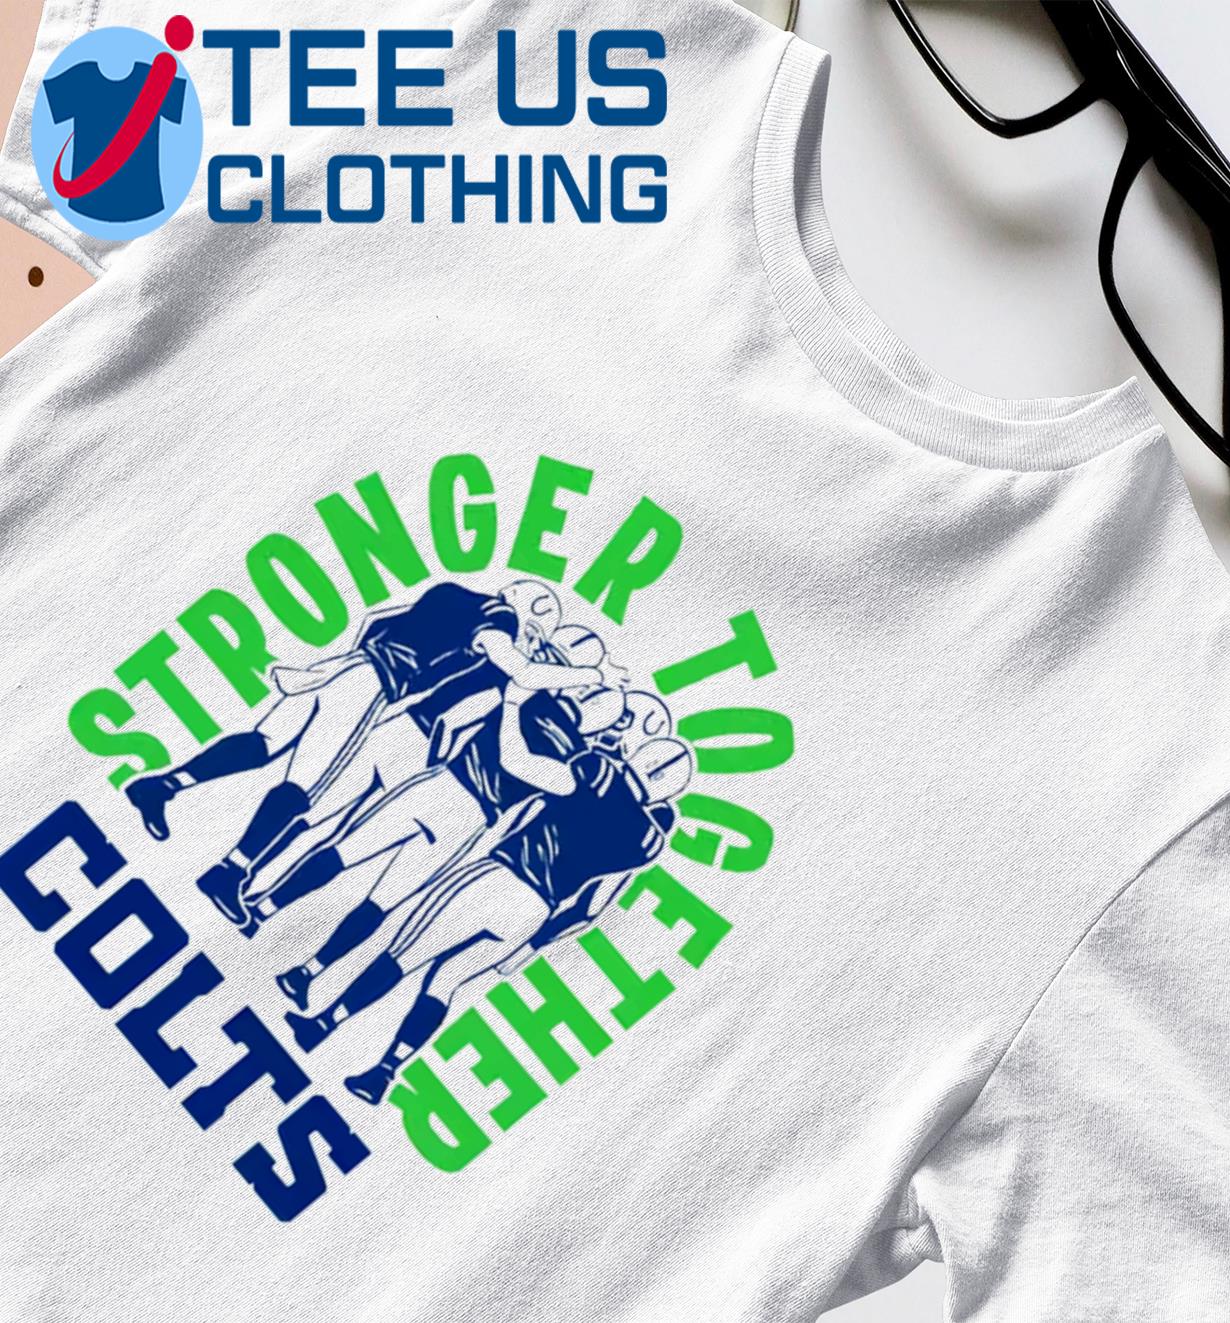 Kicking The Stigma Stronger Together Colts shirt, hoodie, sweater, long  sleeve and tank top